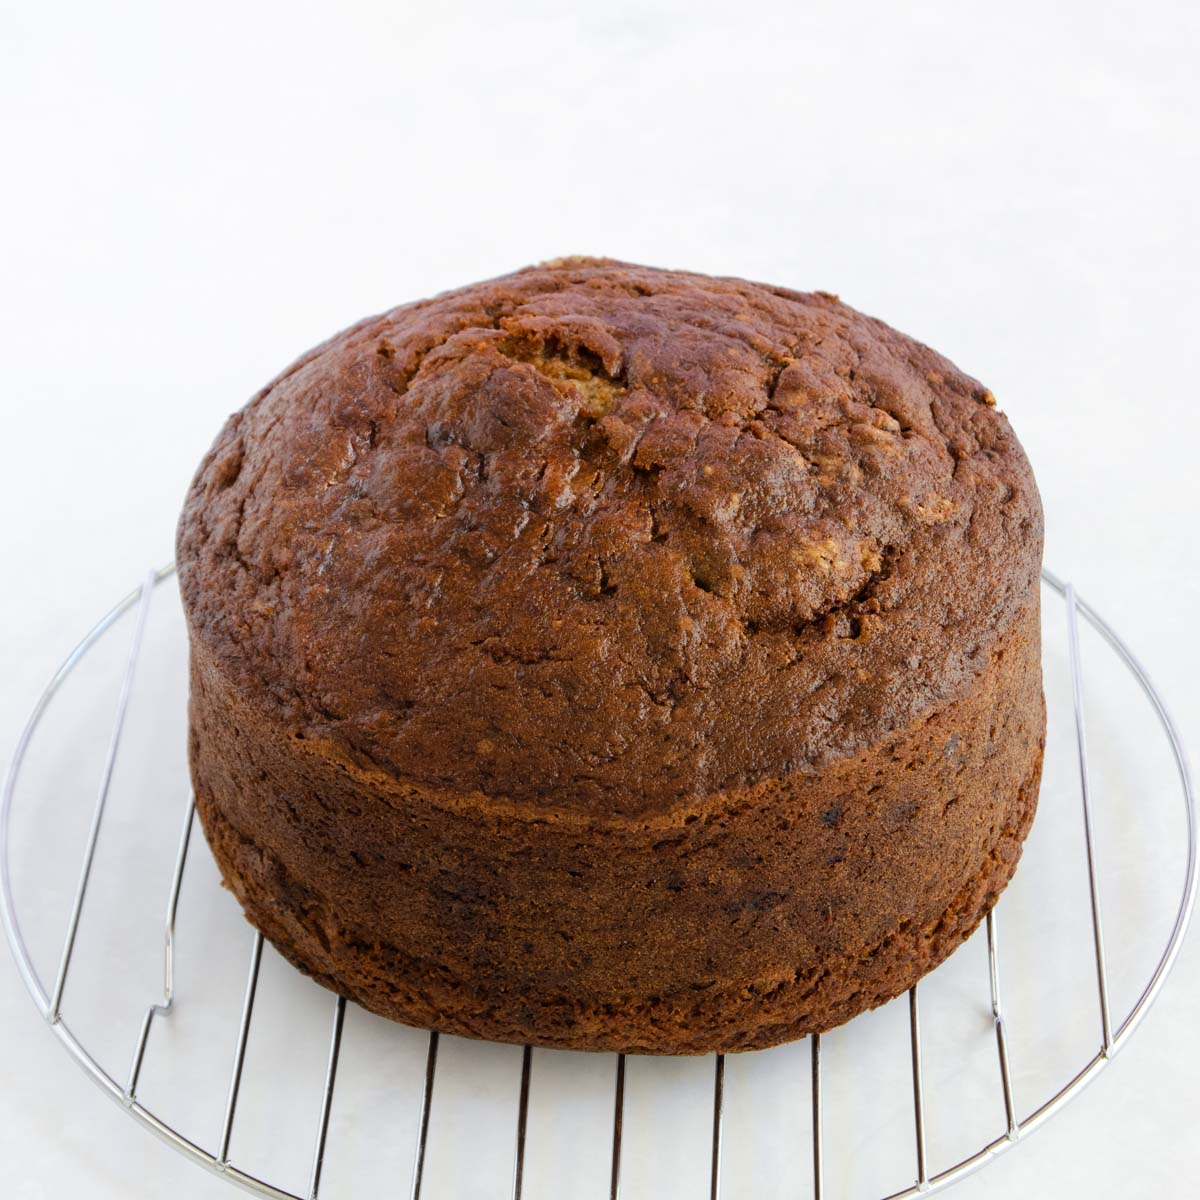 The baked banana cake on a round cooling rack.